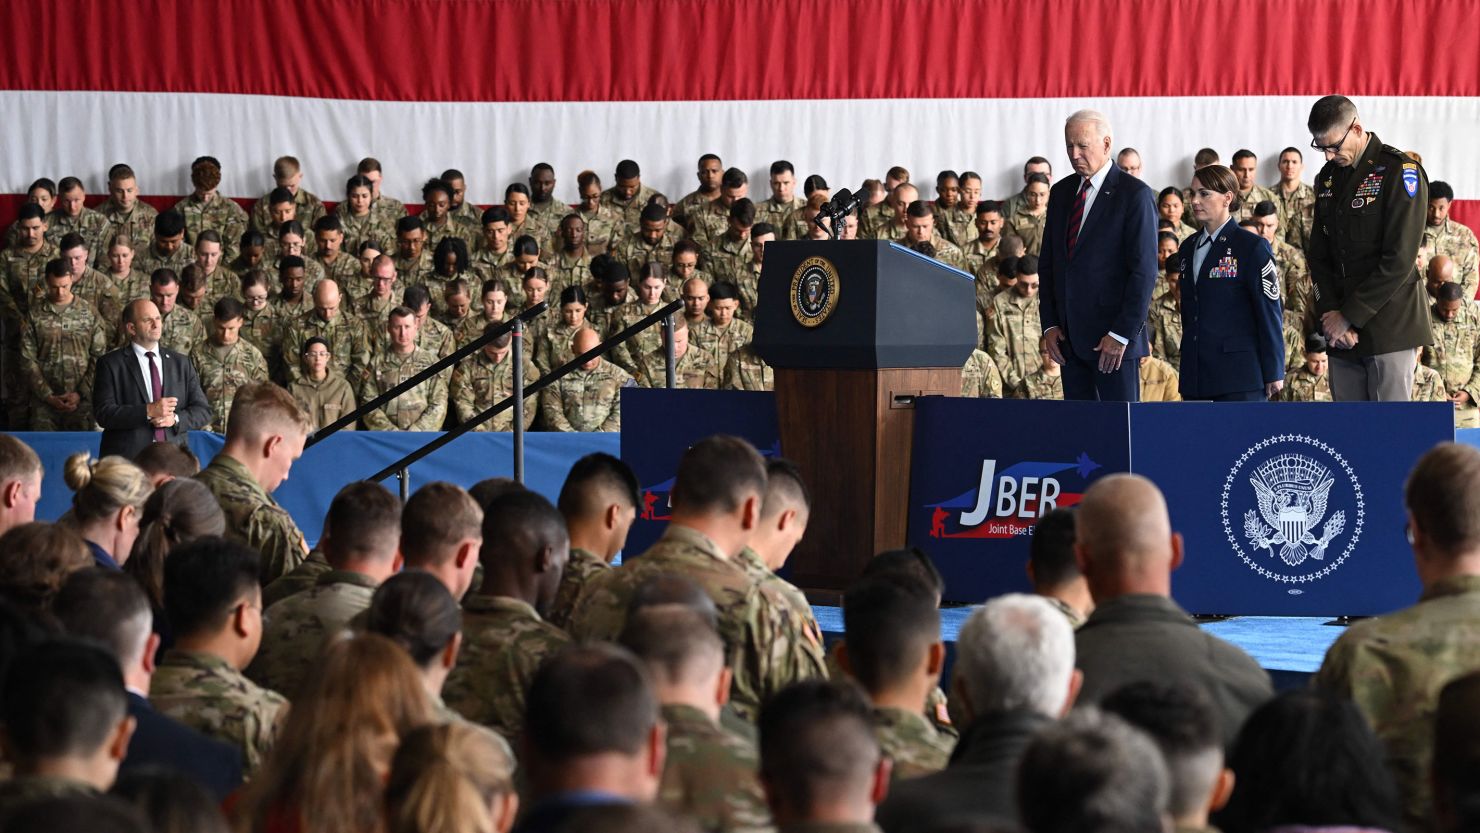 President Joe Biden bows his head during remarks to service members, first responders, and their families on the 22nd anniversary of the September 11, 2001, terrorist attacks, at Joint Base Elmendorf-Richardson in Anchorage, Alaska, on September 11, 2023.